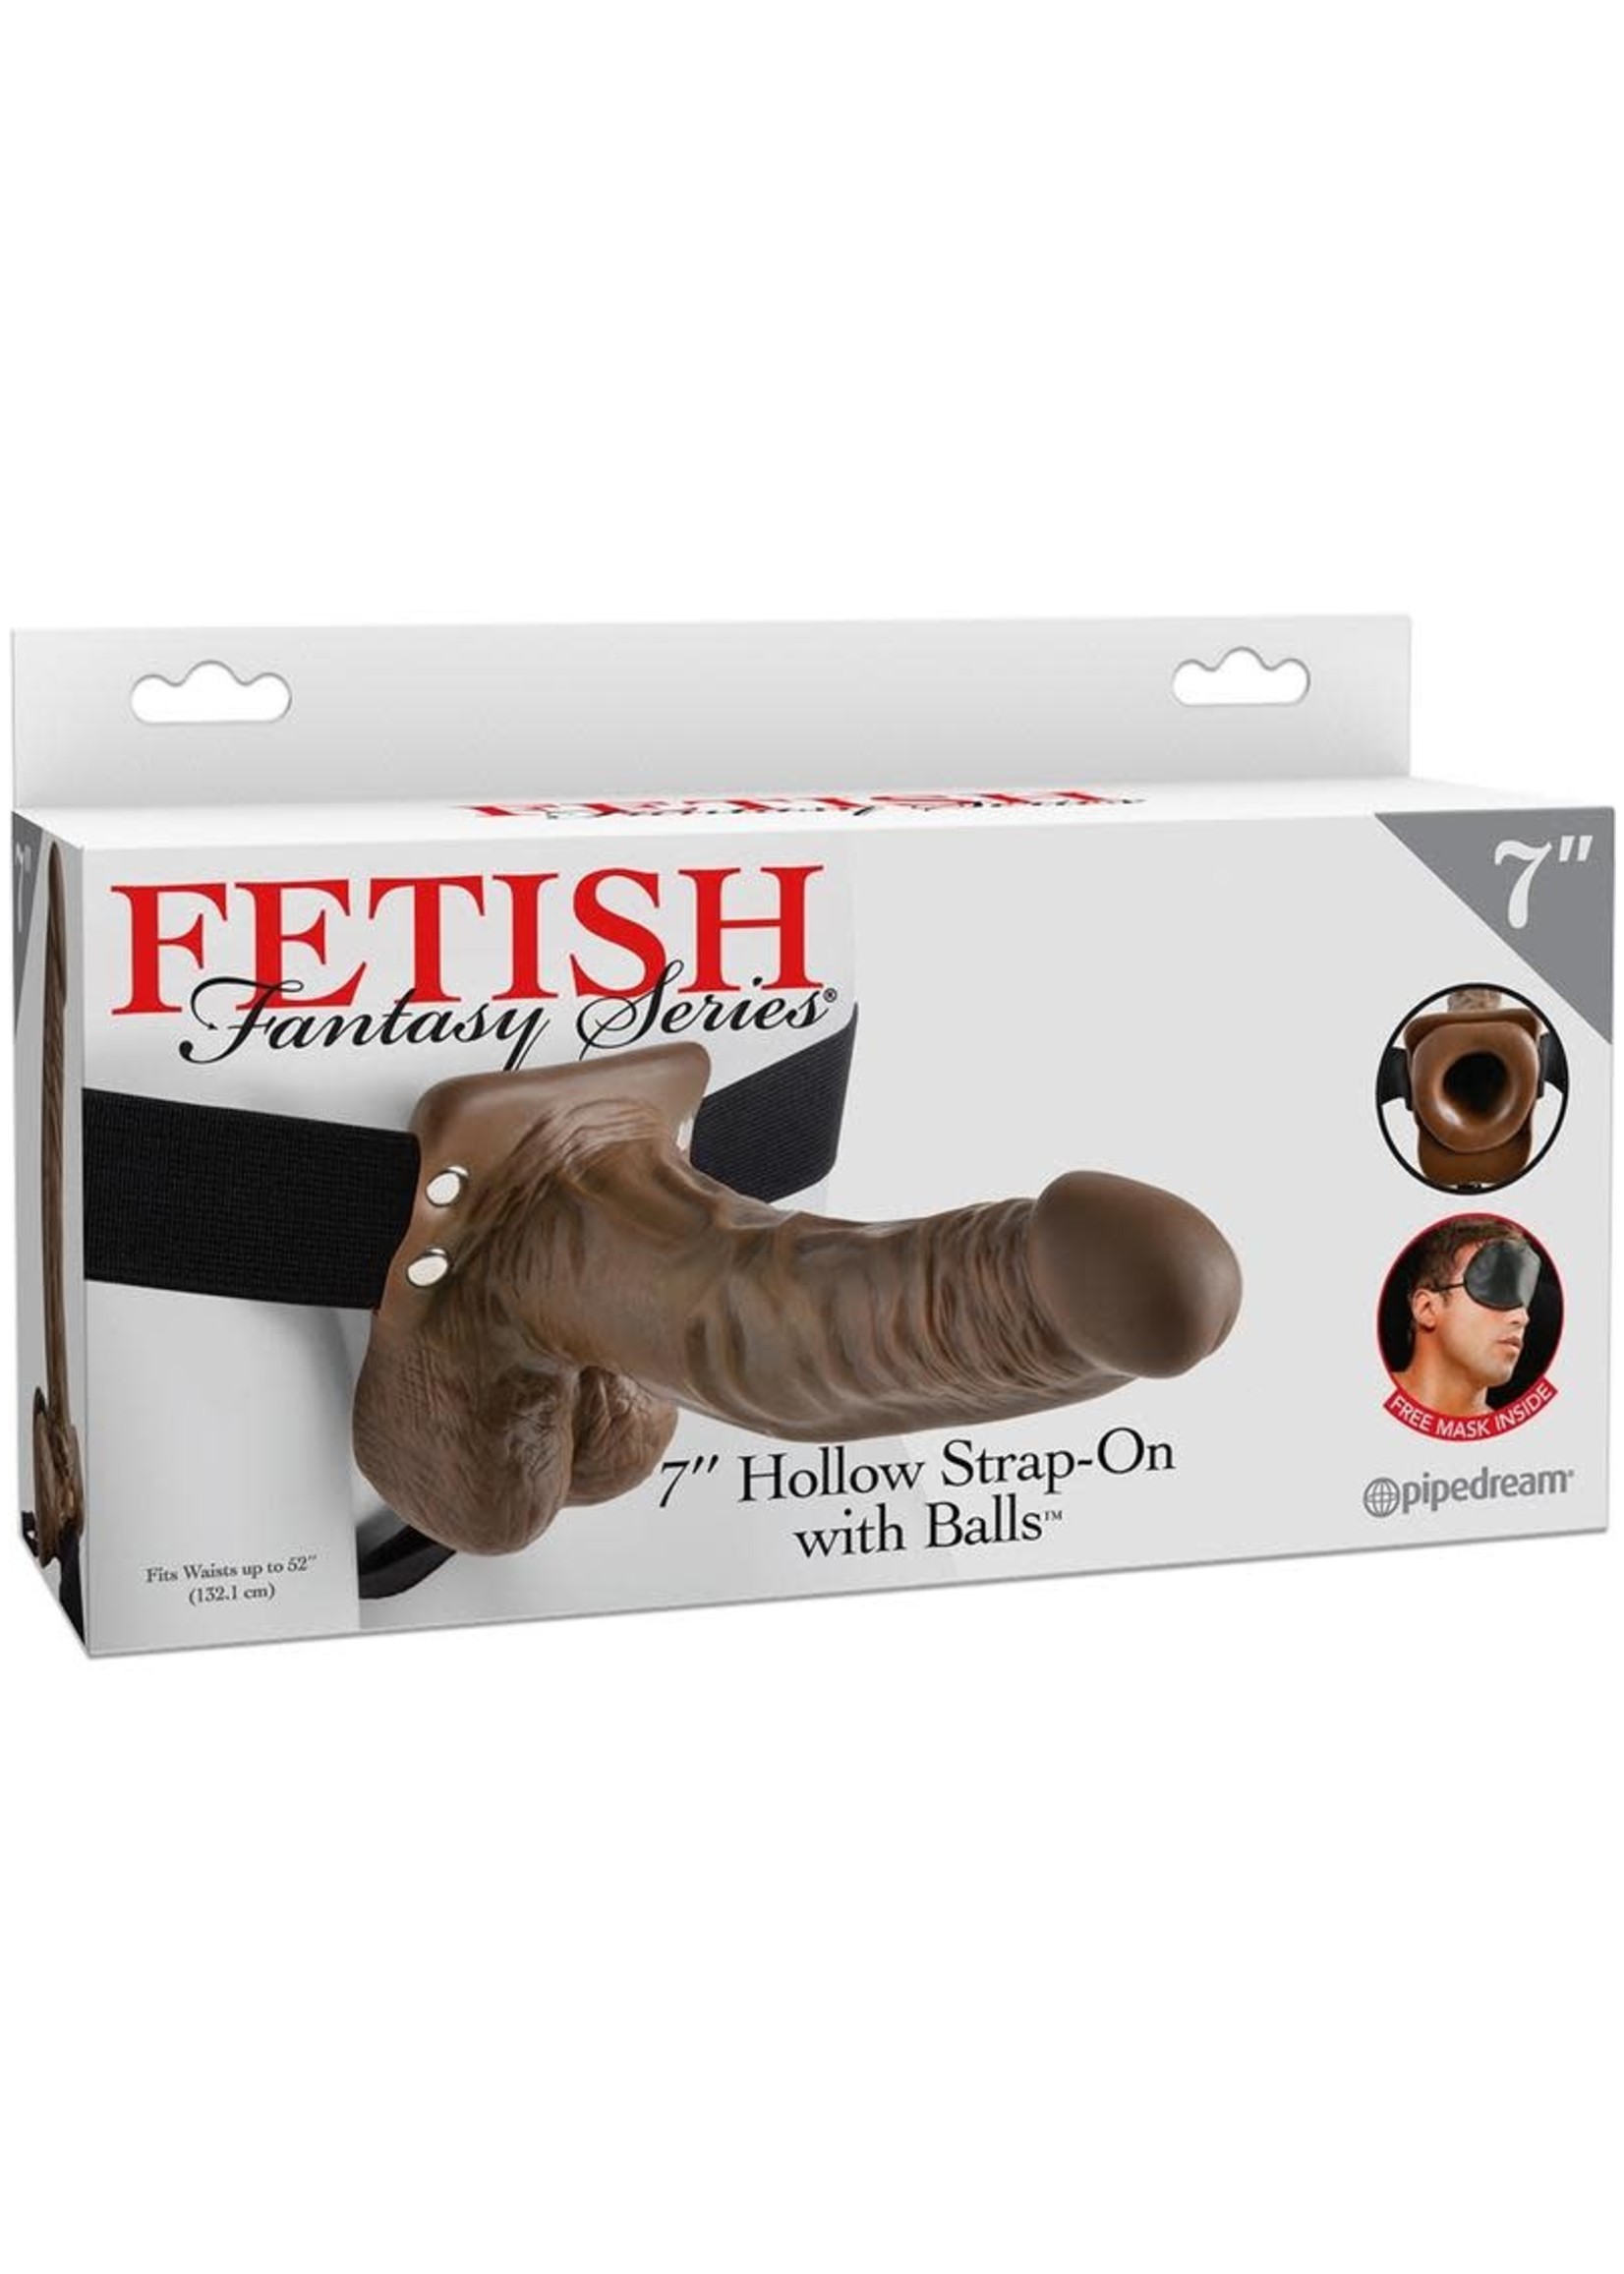 Pipedream Products, Inc. Fetish Fantasy Series Hollow Strap-On Dong With Balls Brown 7 Inch